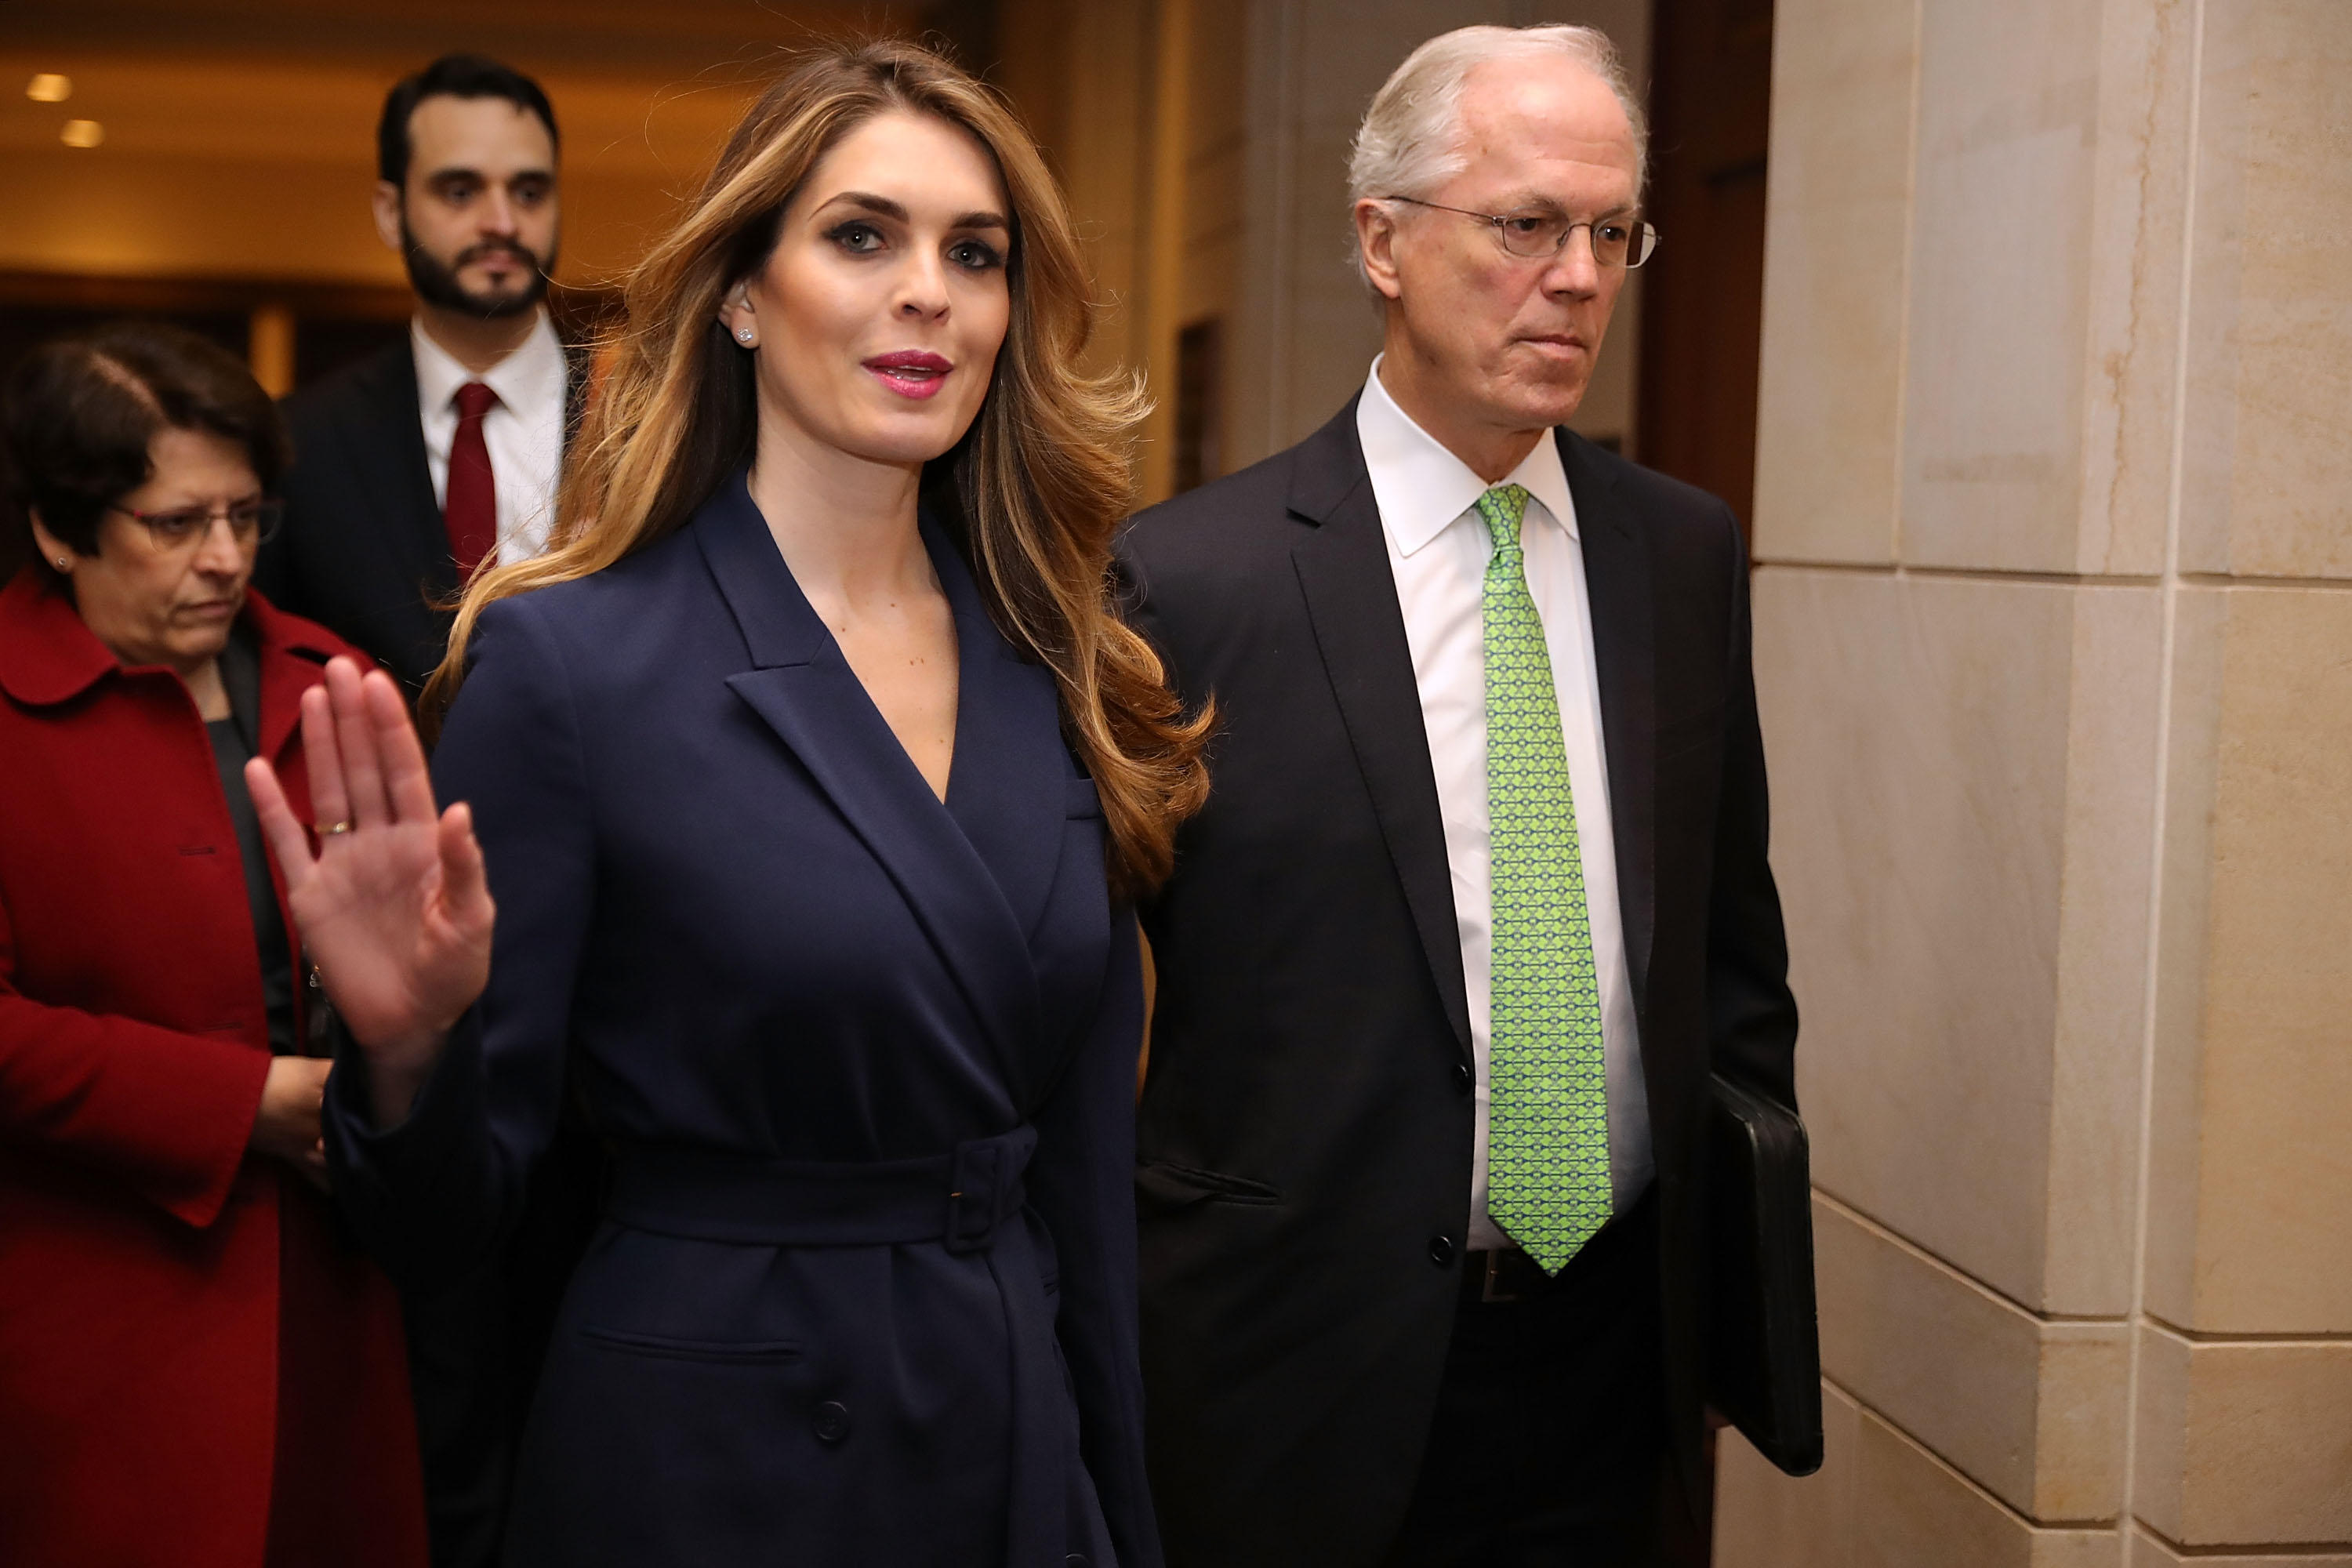 Hope Hicks to resign: White House communications director for Trump will  leave - live updates - CBS News